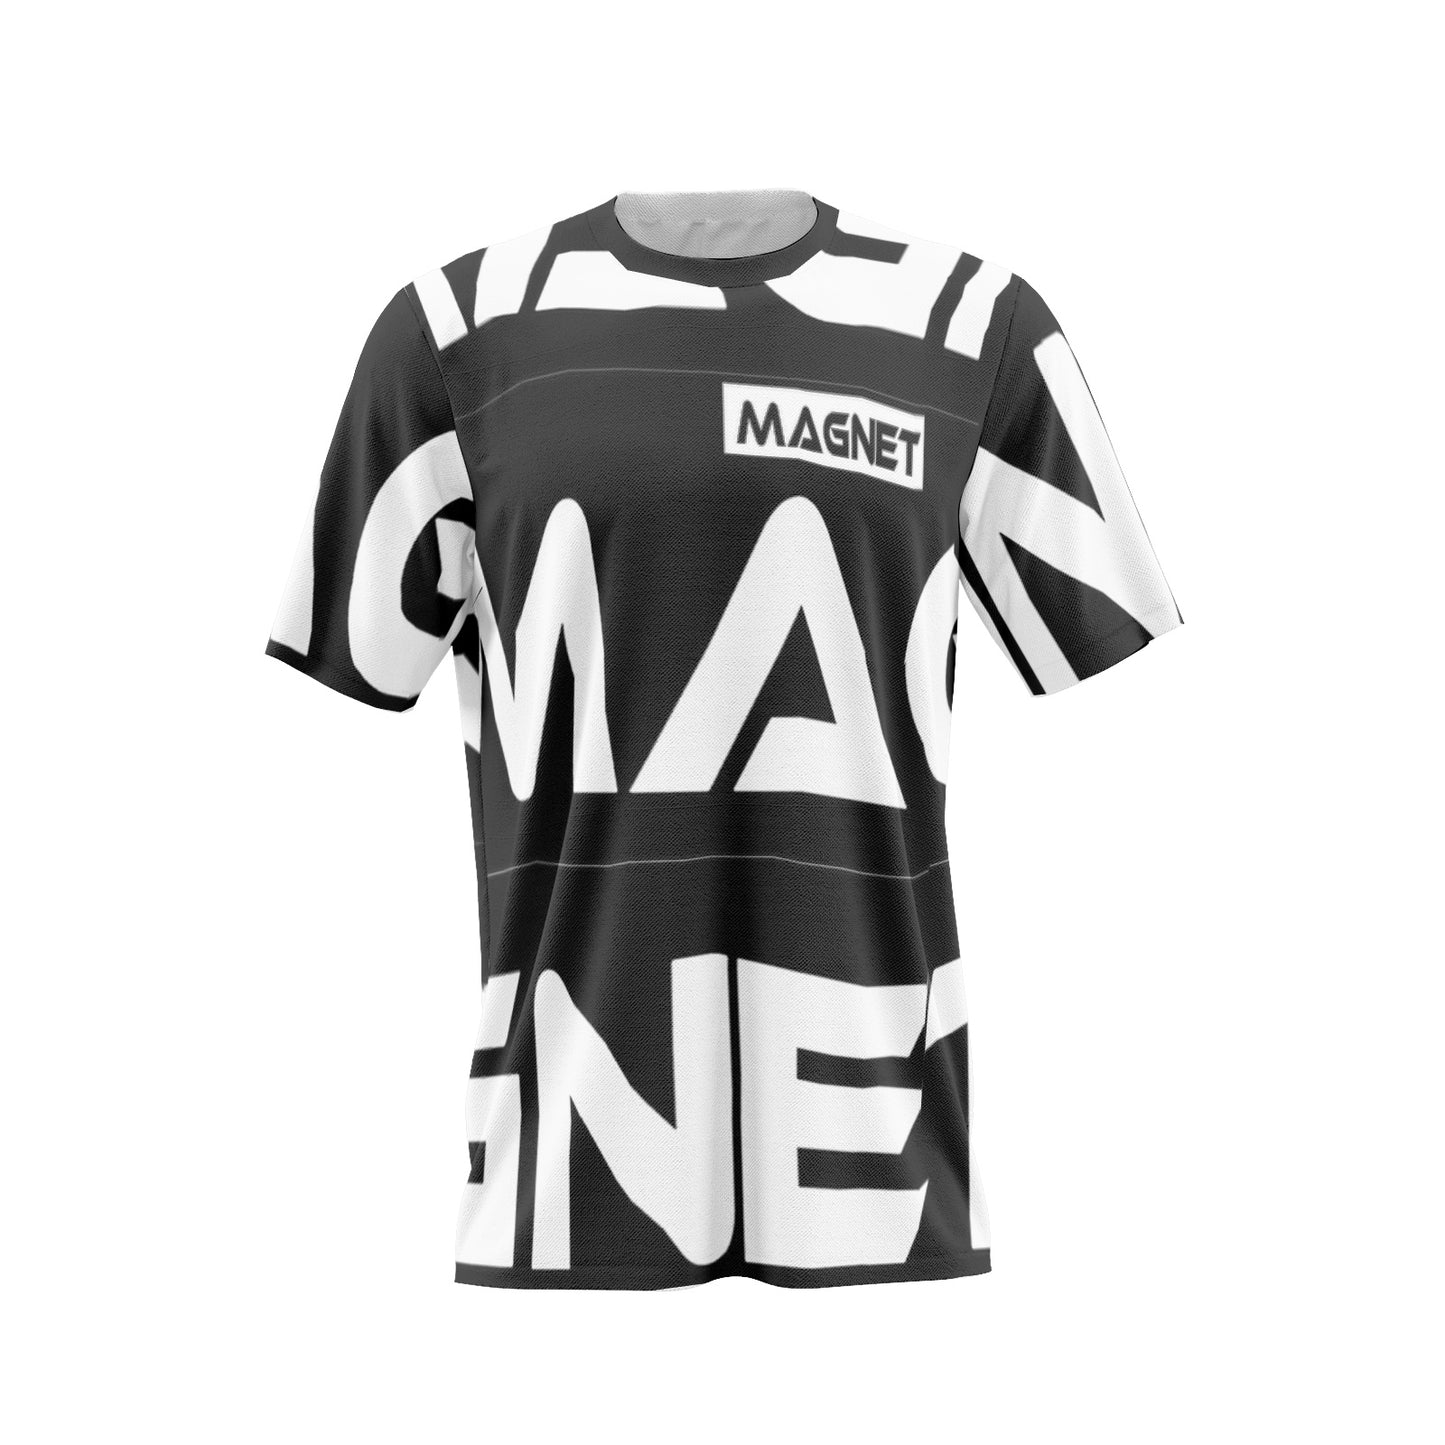 Magnet Bolo Men's All-Over Print T-shirts